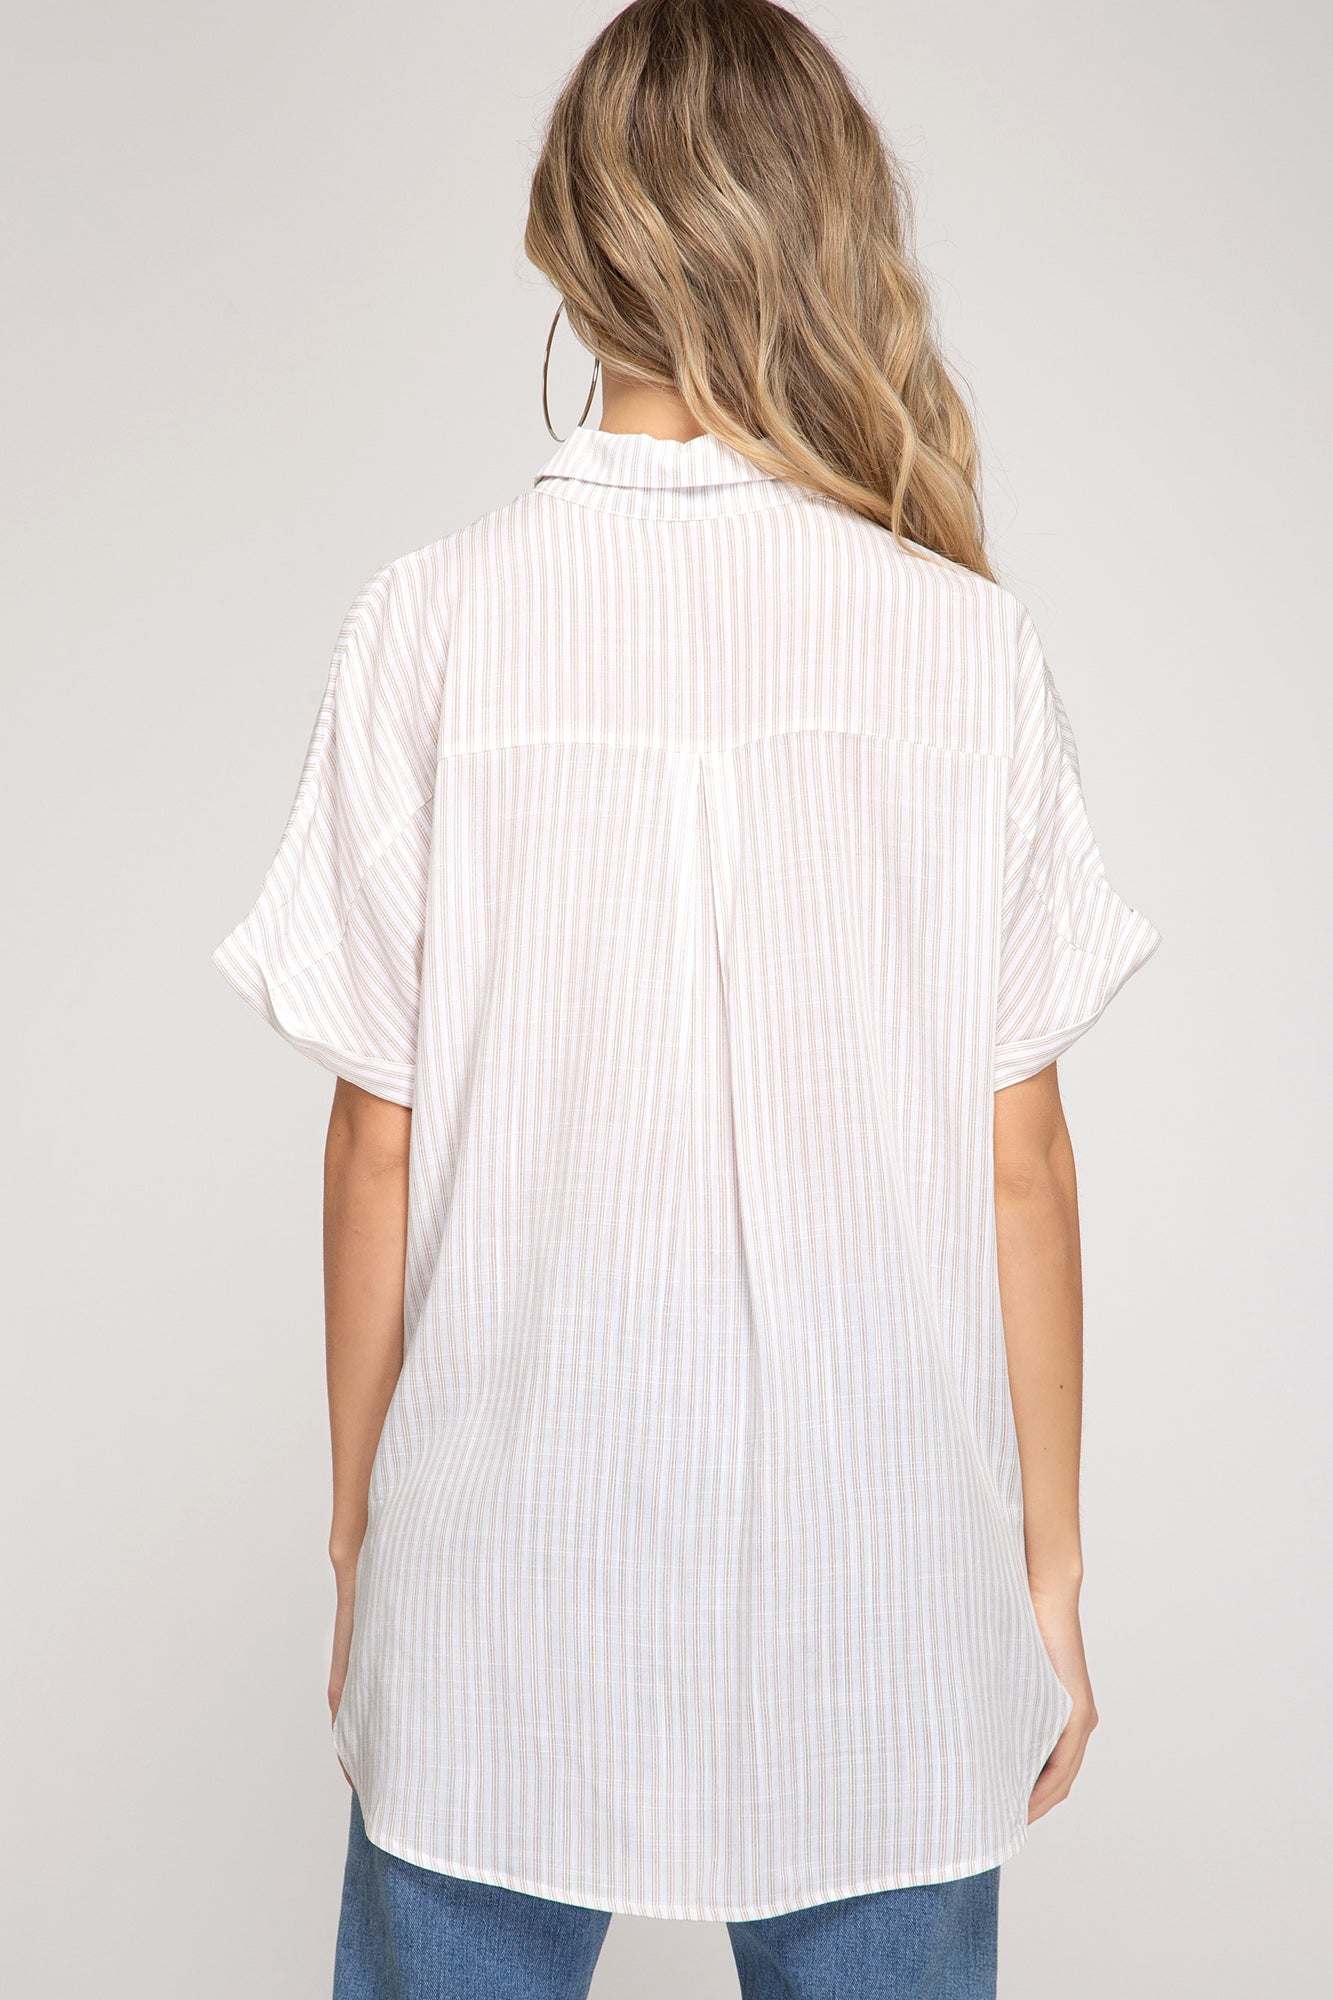 Woven Striped Top With Button Down Detail!